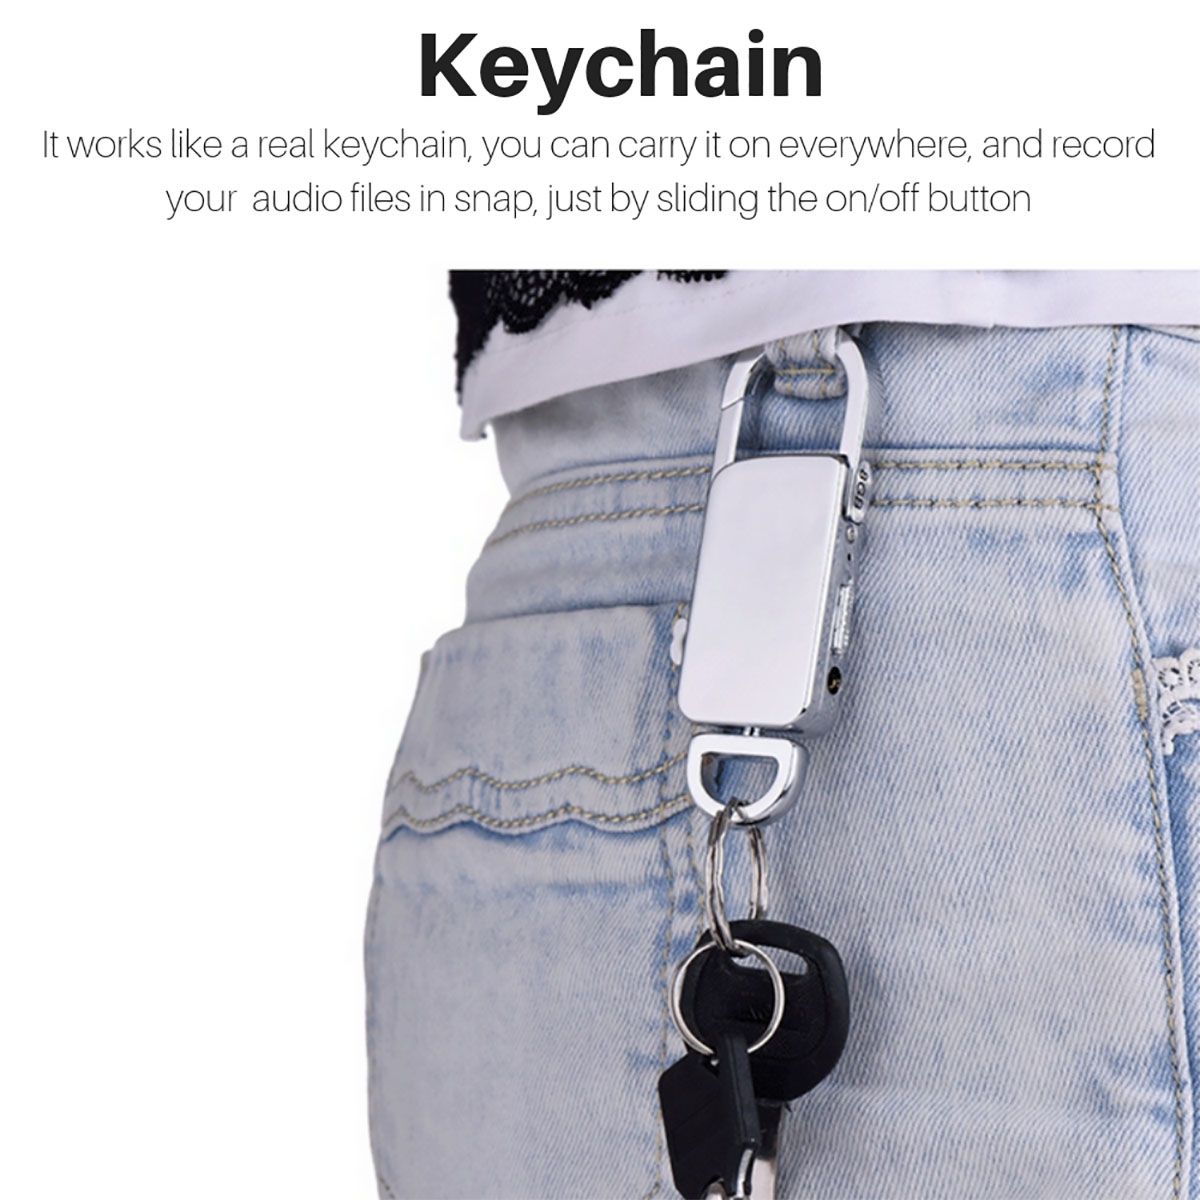 8GB-16GB-Audio-Recorder-Voice-Activated-Device-90-Hours-Recording-Keychain-1567240